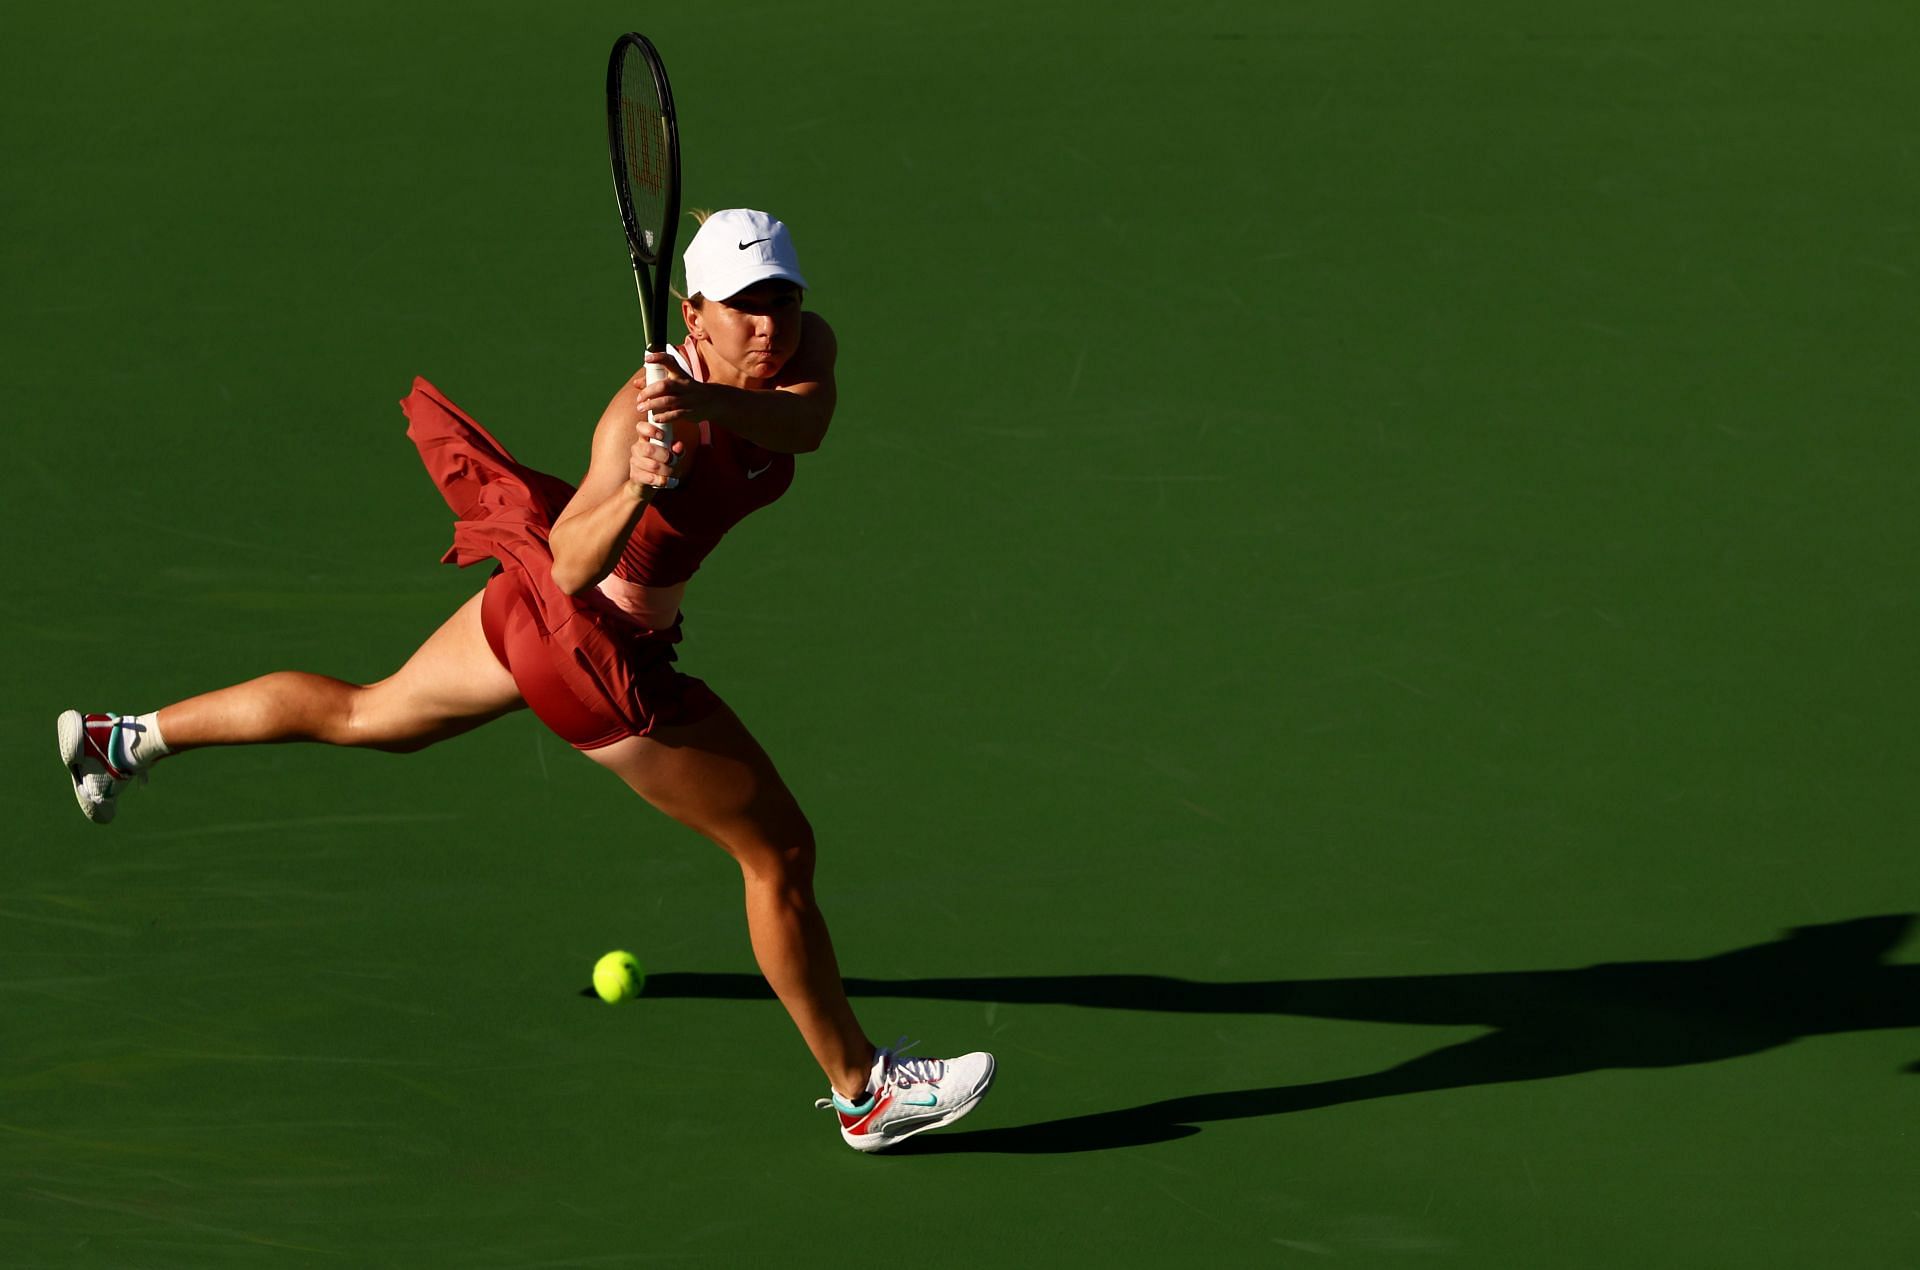 Simona Halep in action at the 2022 BNP Paribas Open